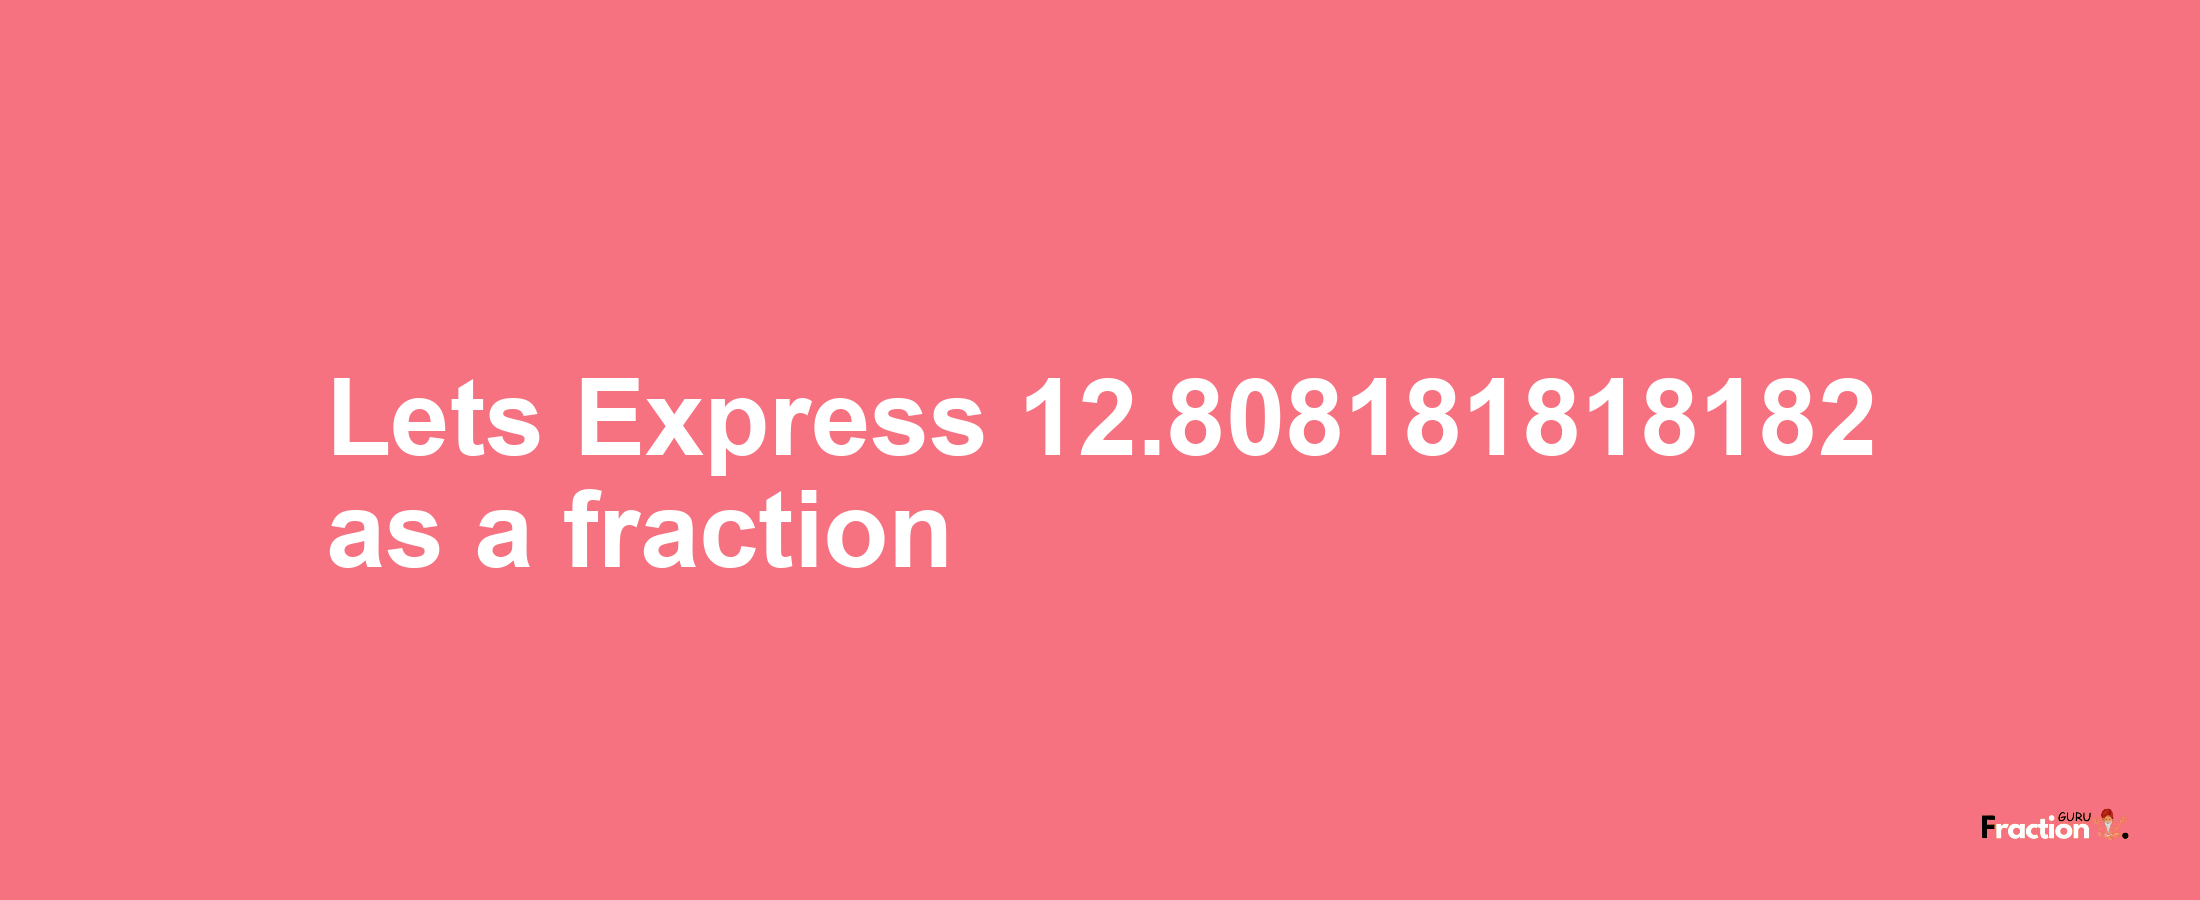 Lets Express 12.808181818182 as afraction